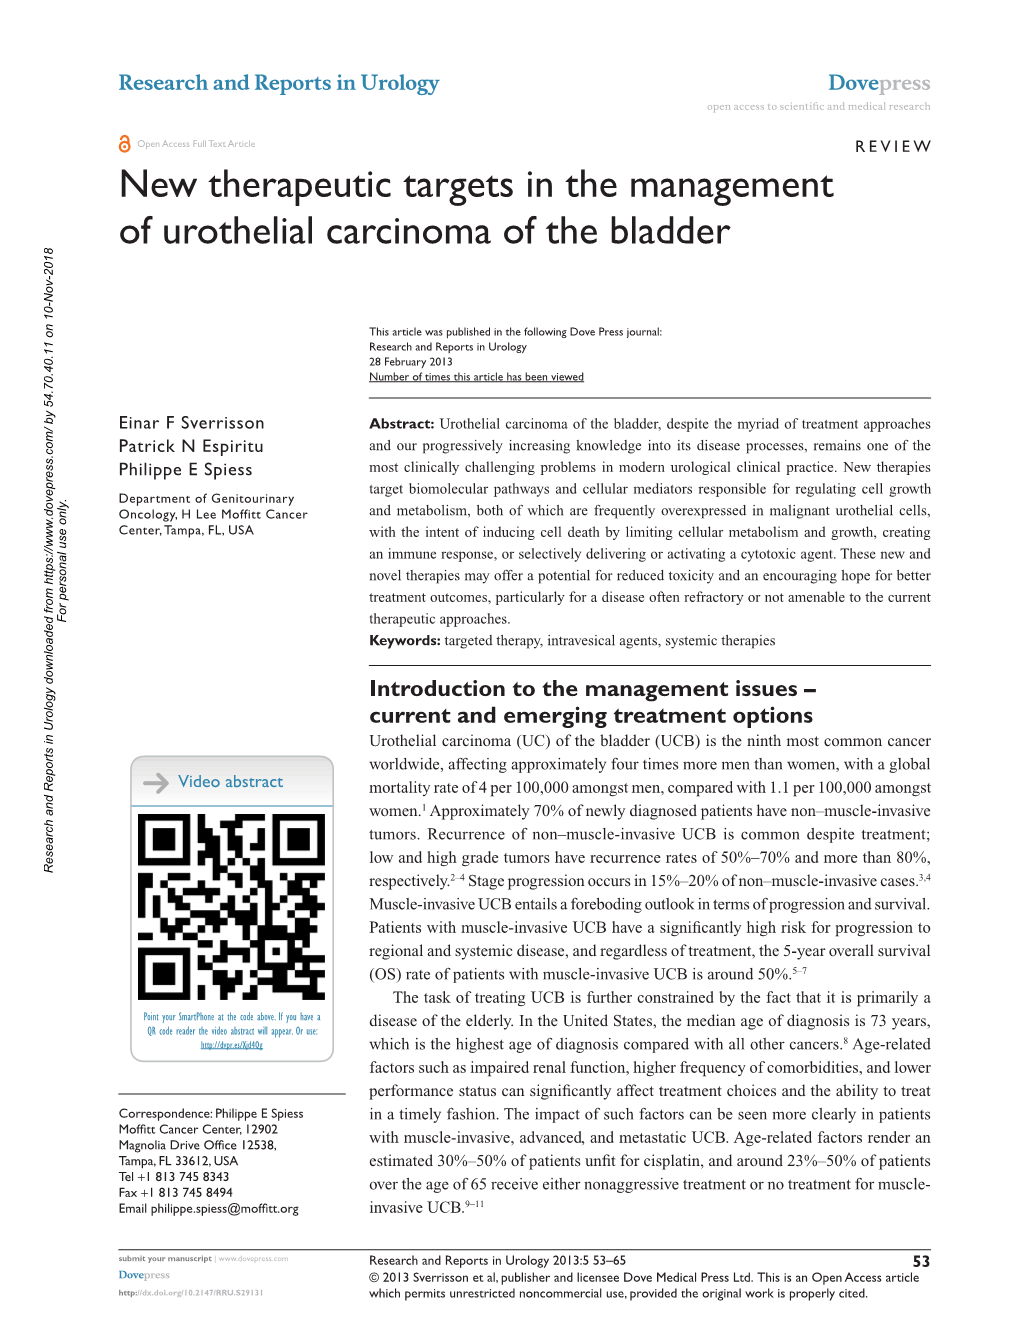 New Therapeutic Targets in the Management of Urothelial Carcinoma of the Bladder